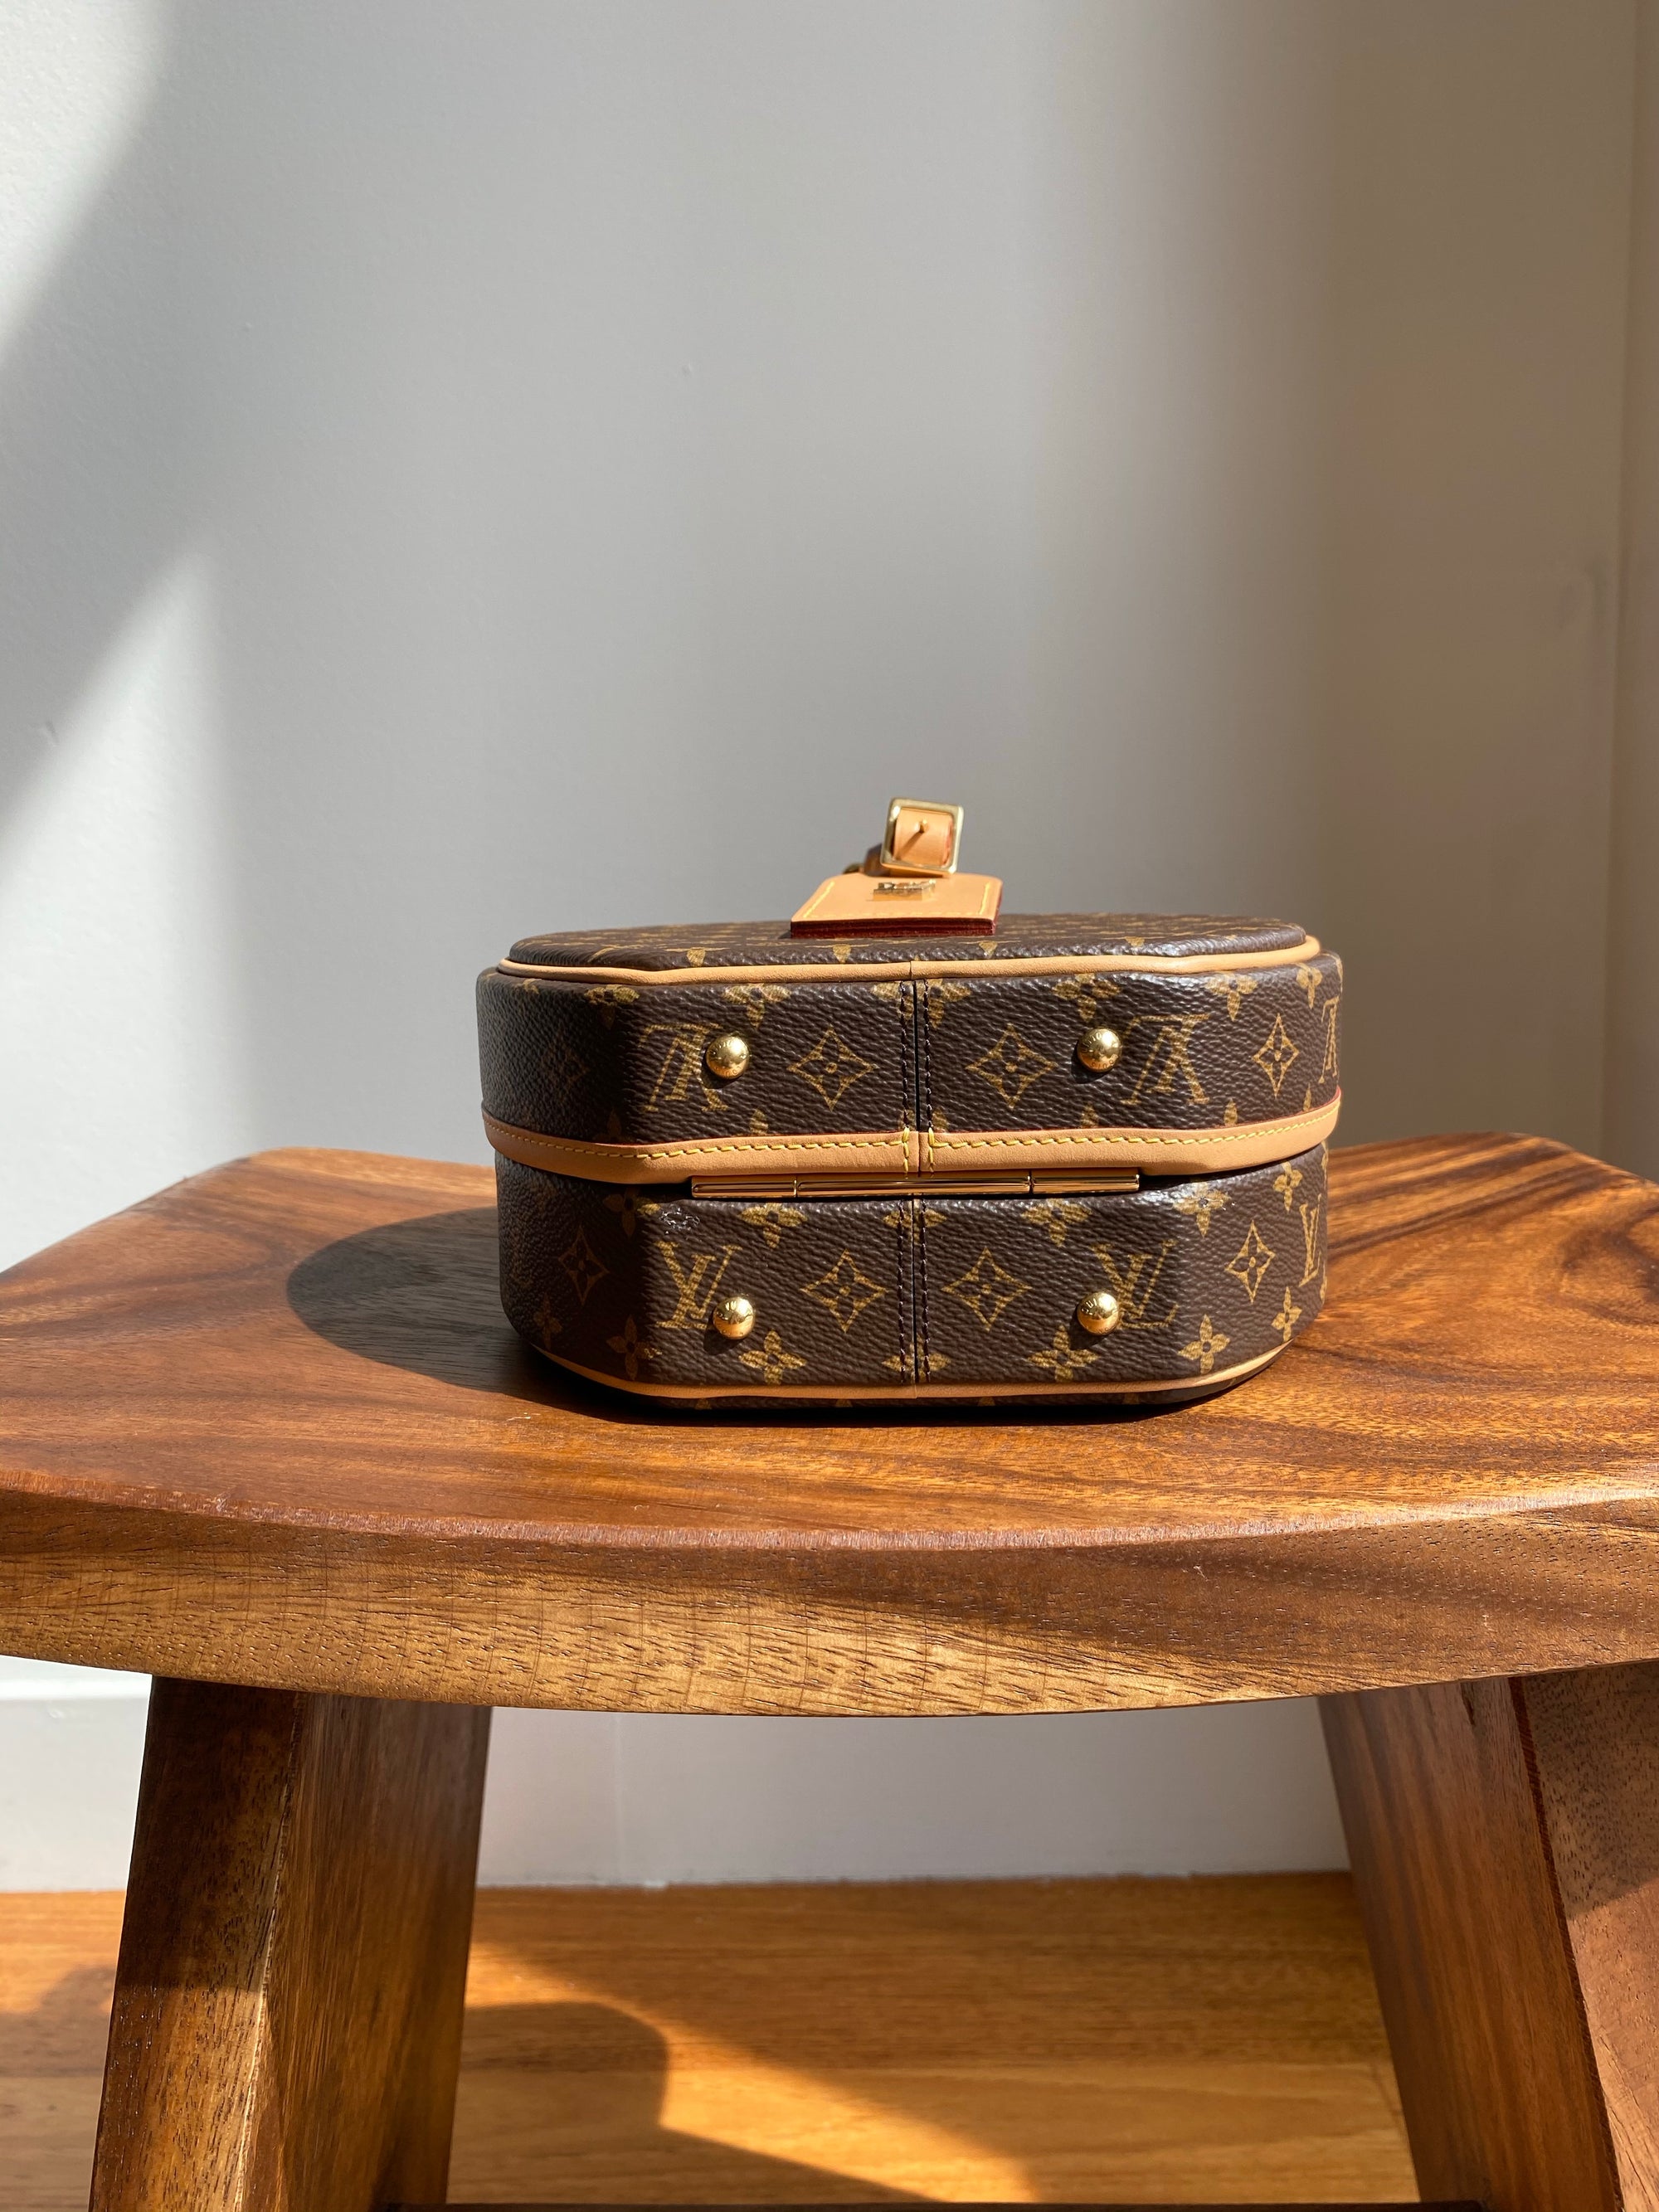 Louis Vuitton Classic leather Stool Square